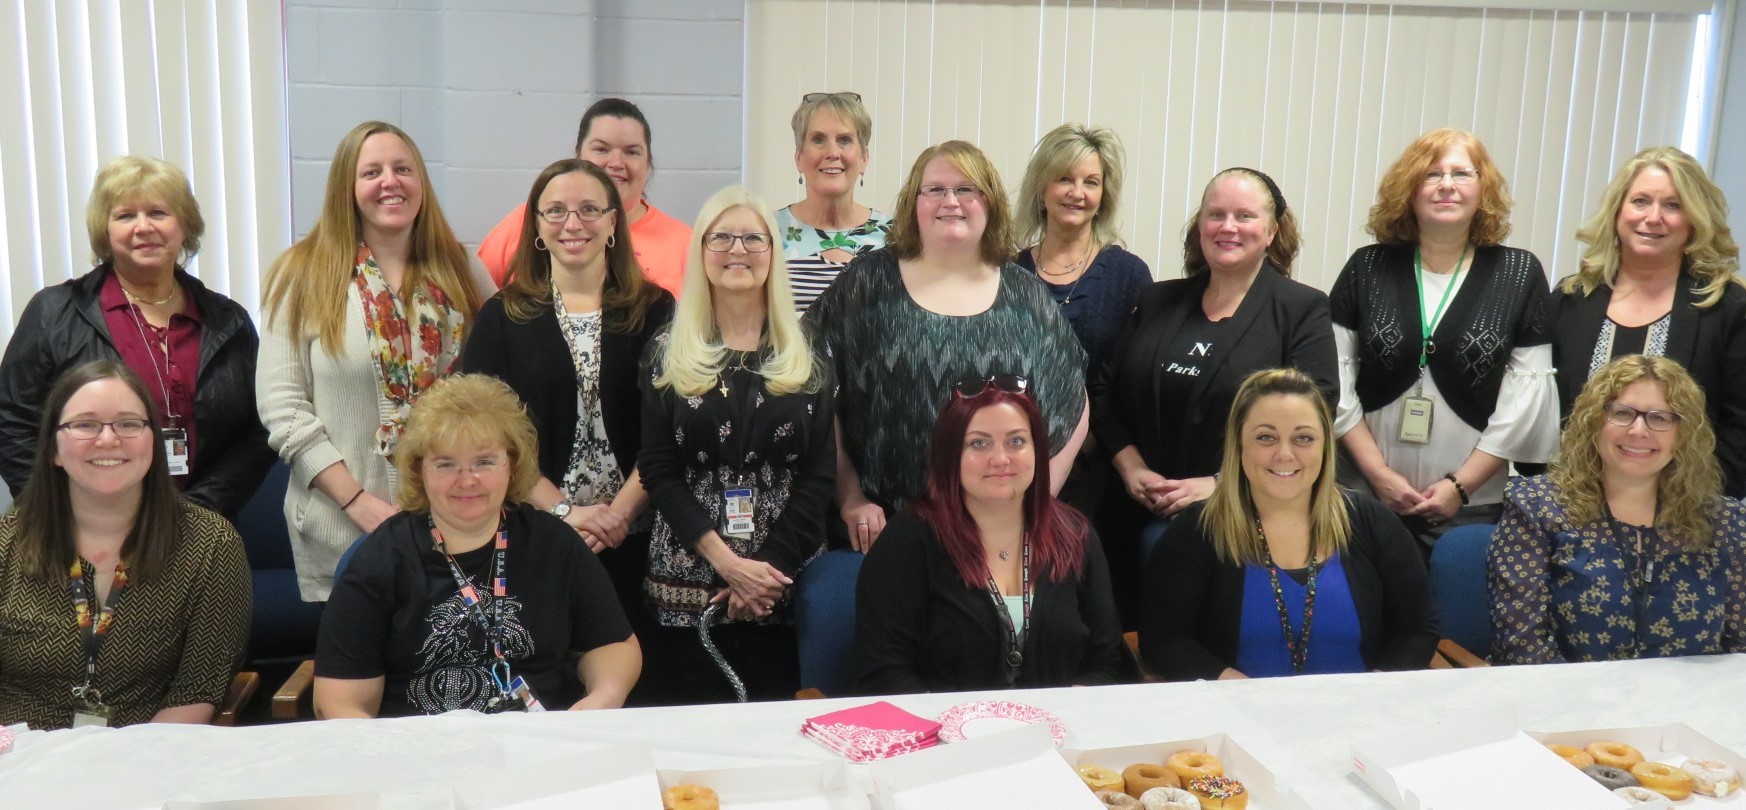 Administrative professionals at SCI Greene gather for a special lunch